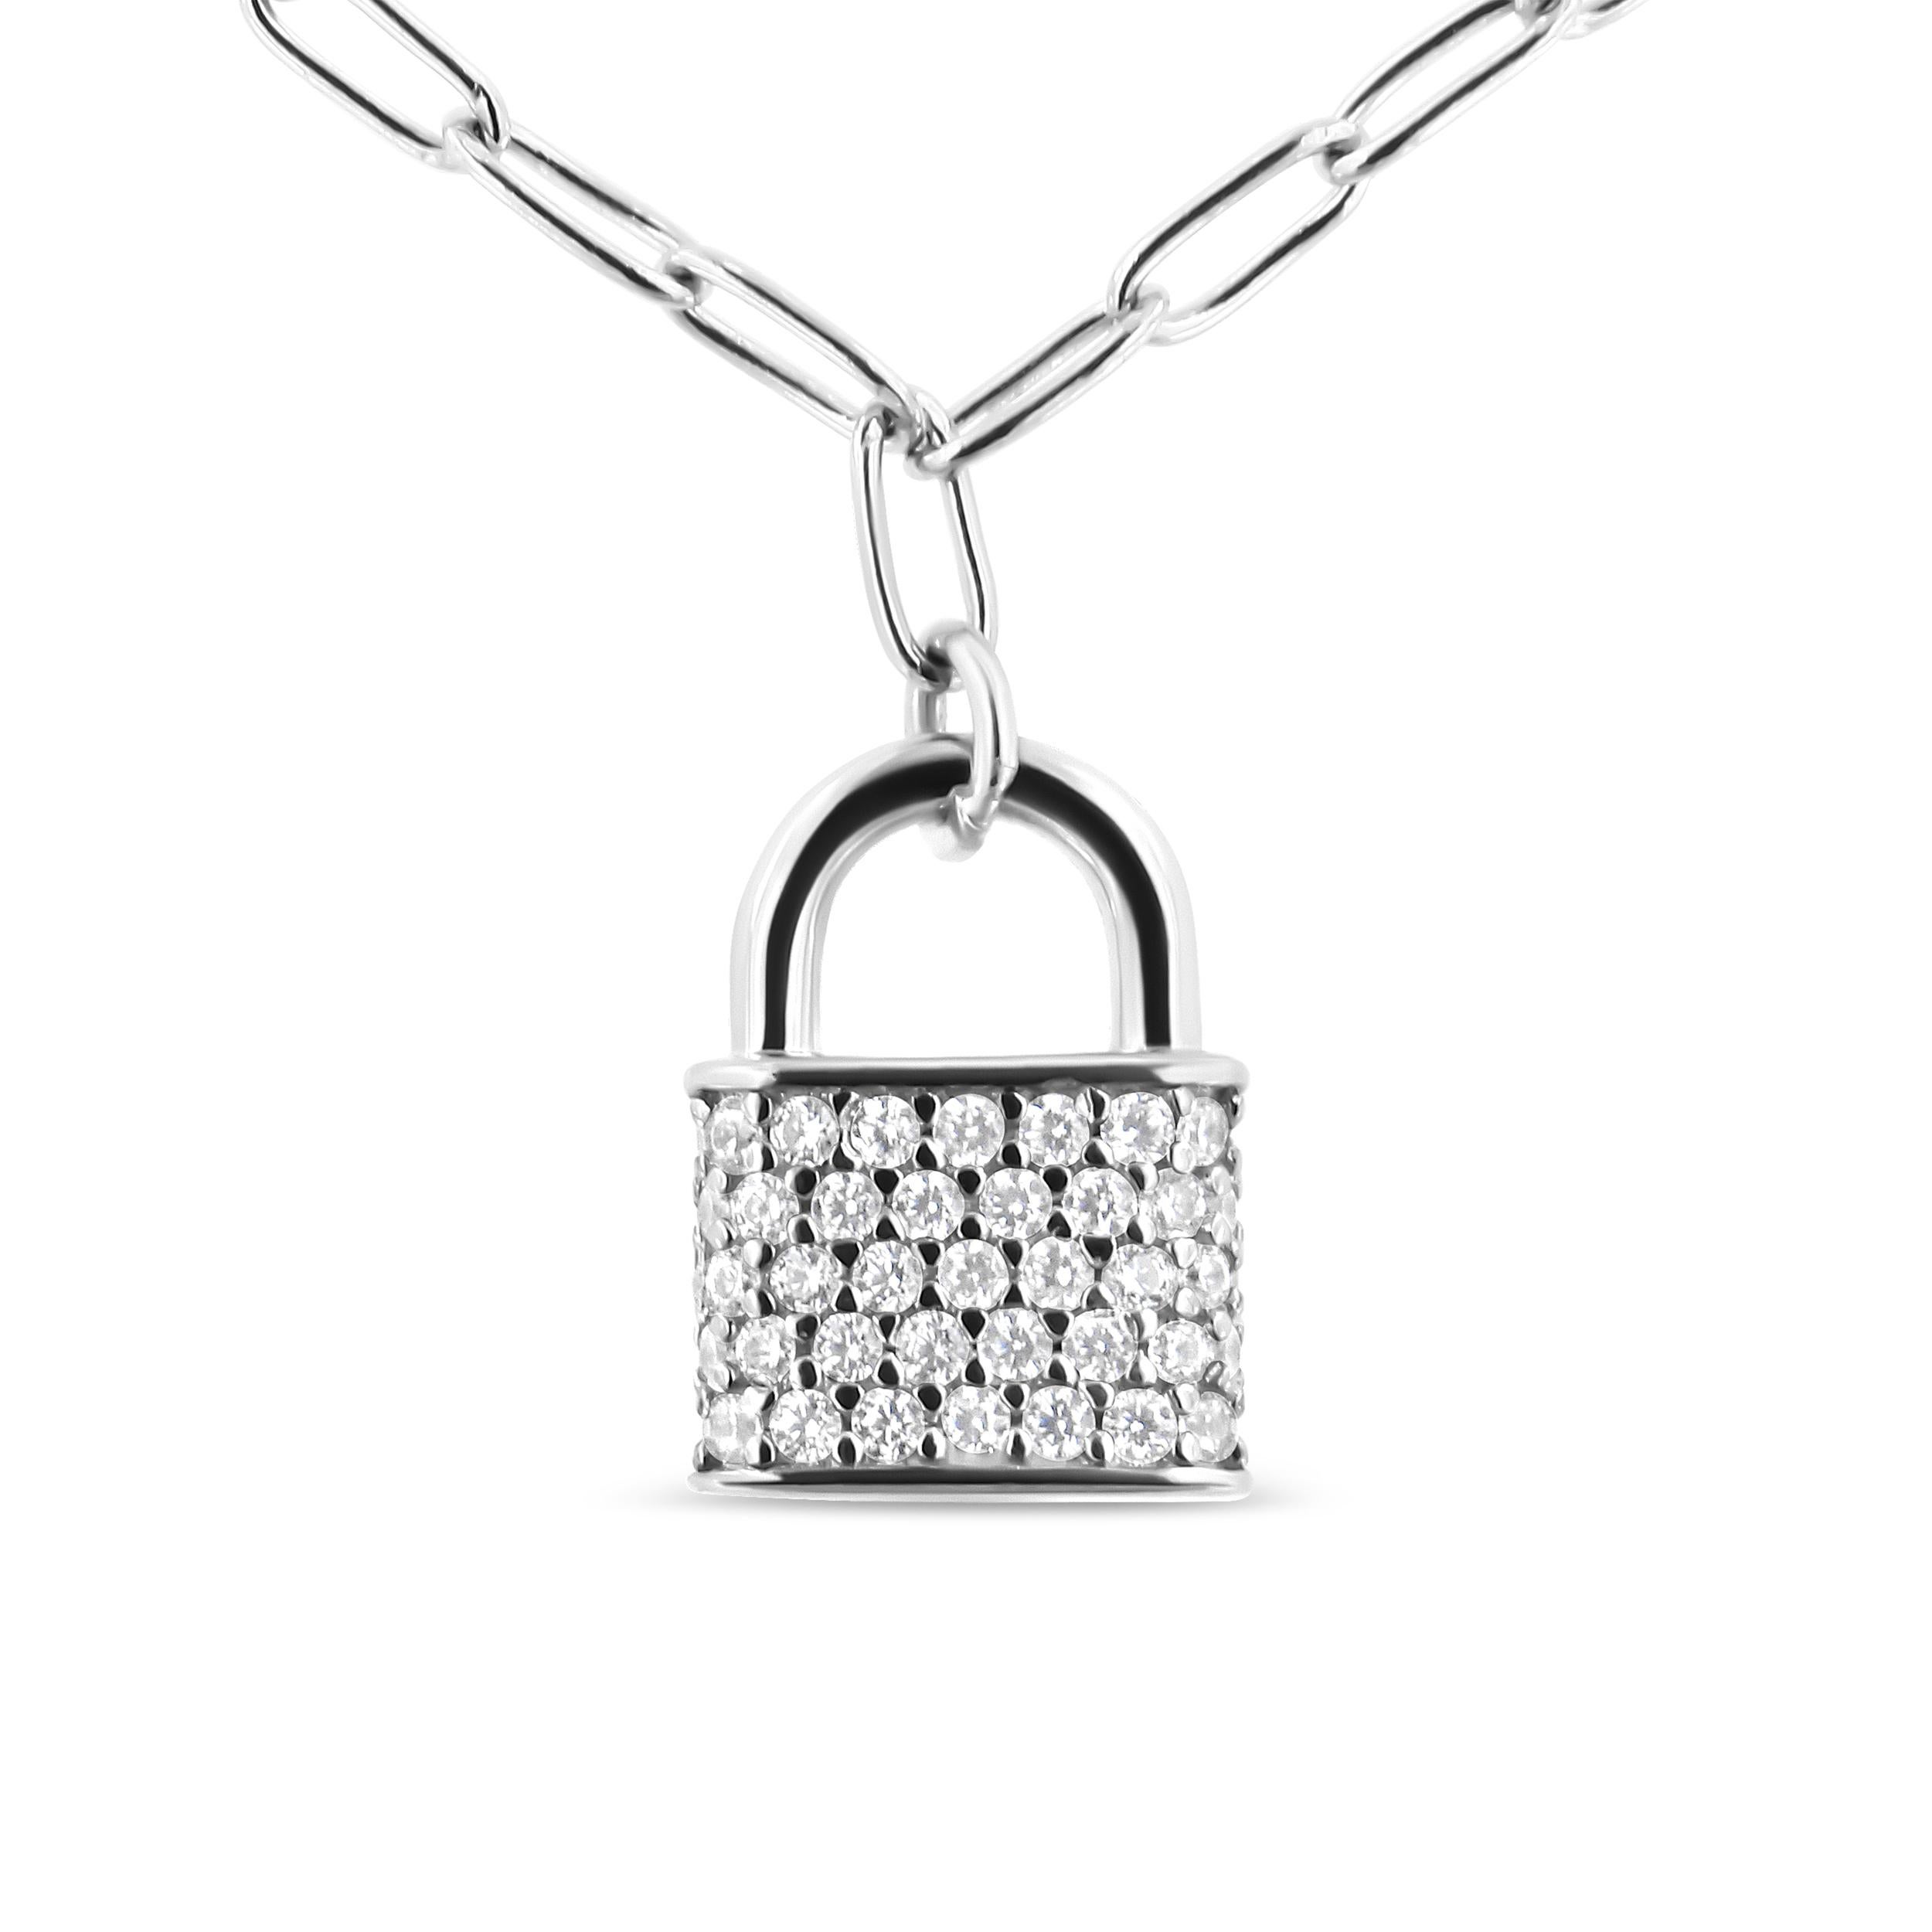 This exquisite pendant necklace is crafted from top-quality .925 sterling silver and boasts a stunning 1/4 cttw diamond lock design. The diamonds, with H-I color and a minimum SI2-I1 clarity, are hand-selected to ensure that they are of the highest